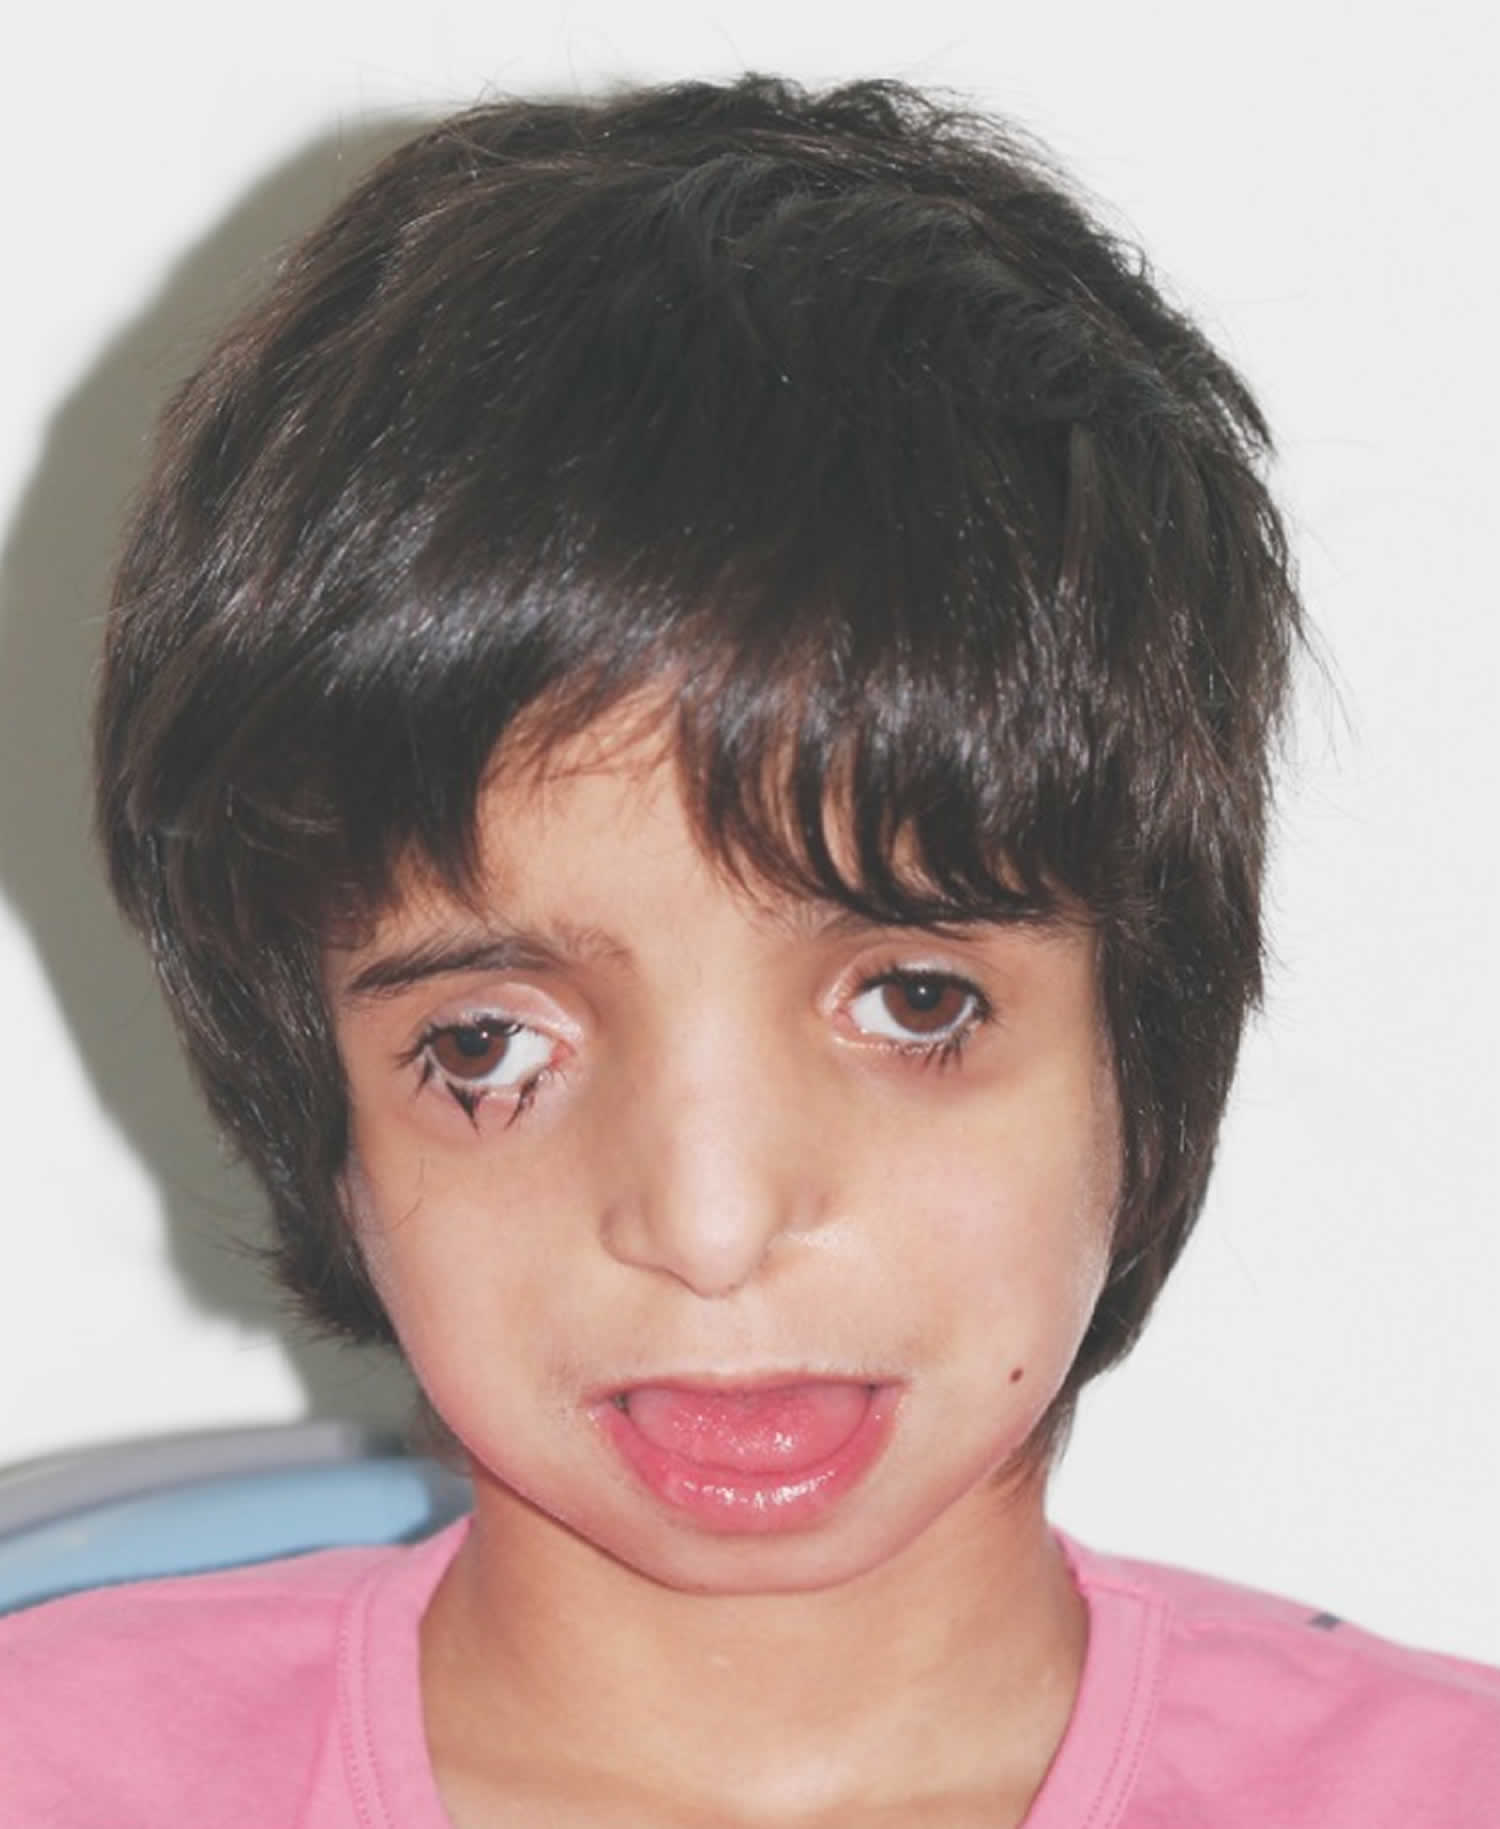 Top 99+ Images pictures of treacher collins syndrome Stunning